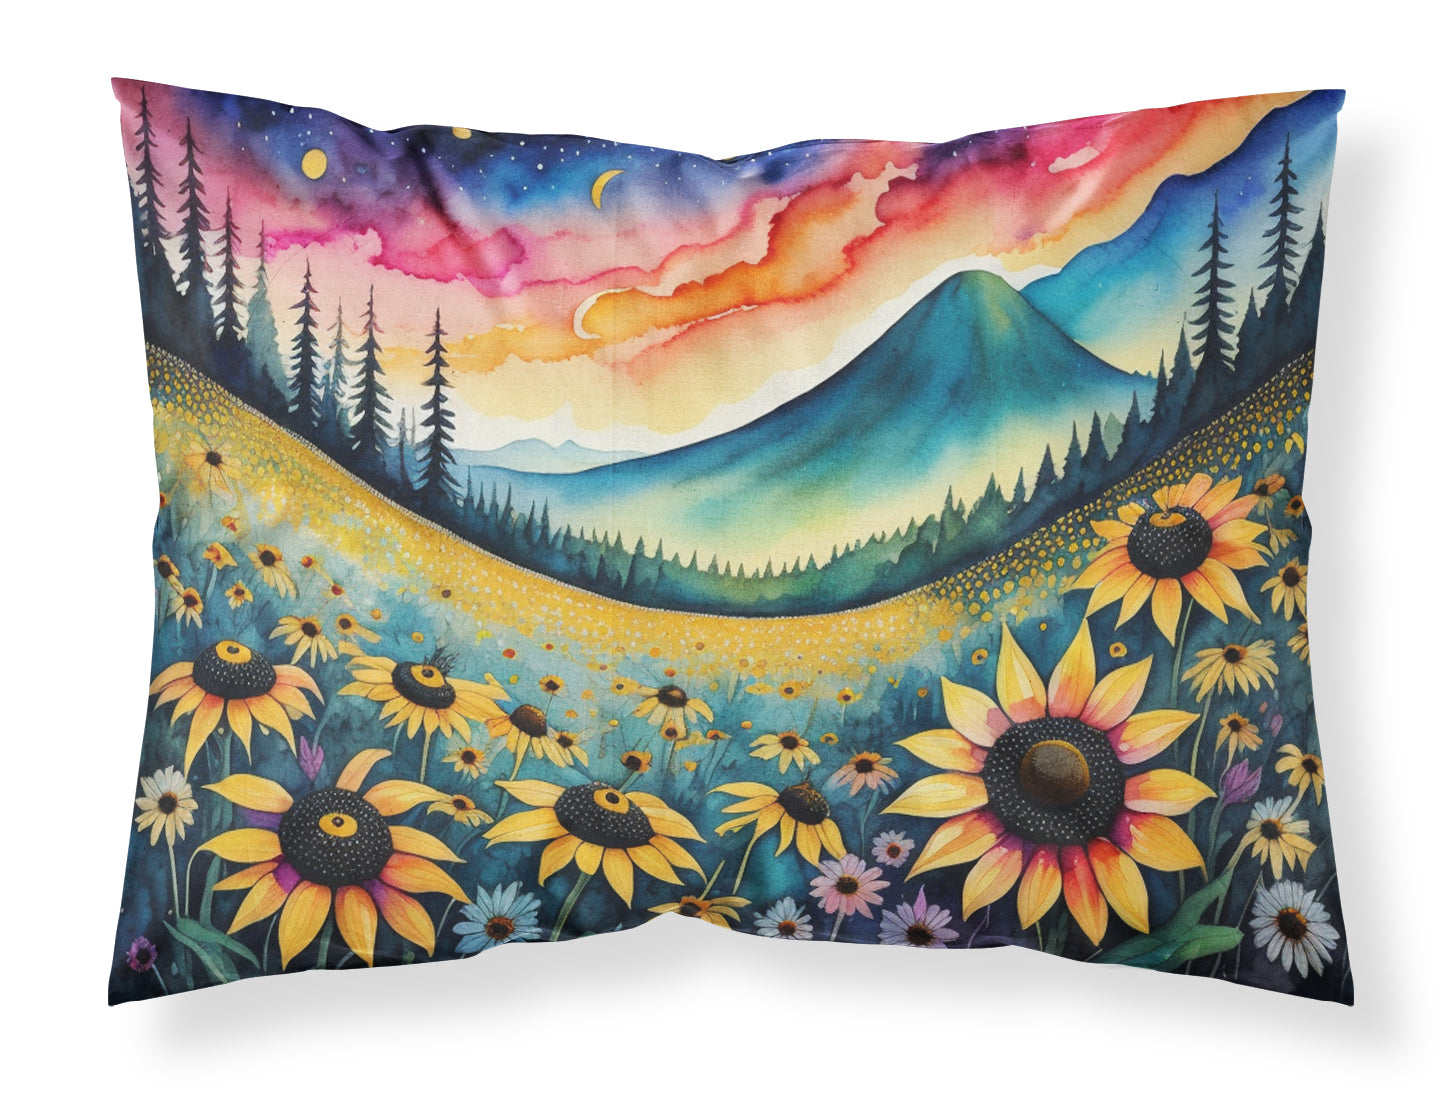 Buy this Black-eyed Susans in Color Fabric Standard Pillowcase